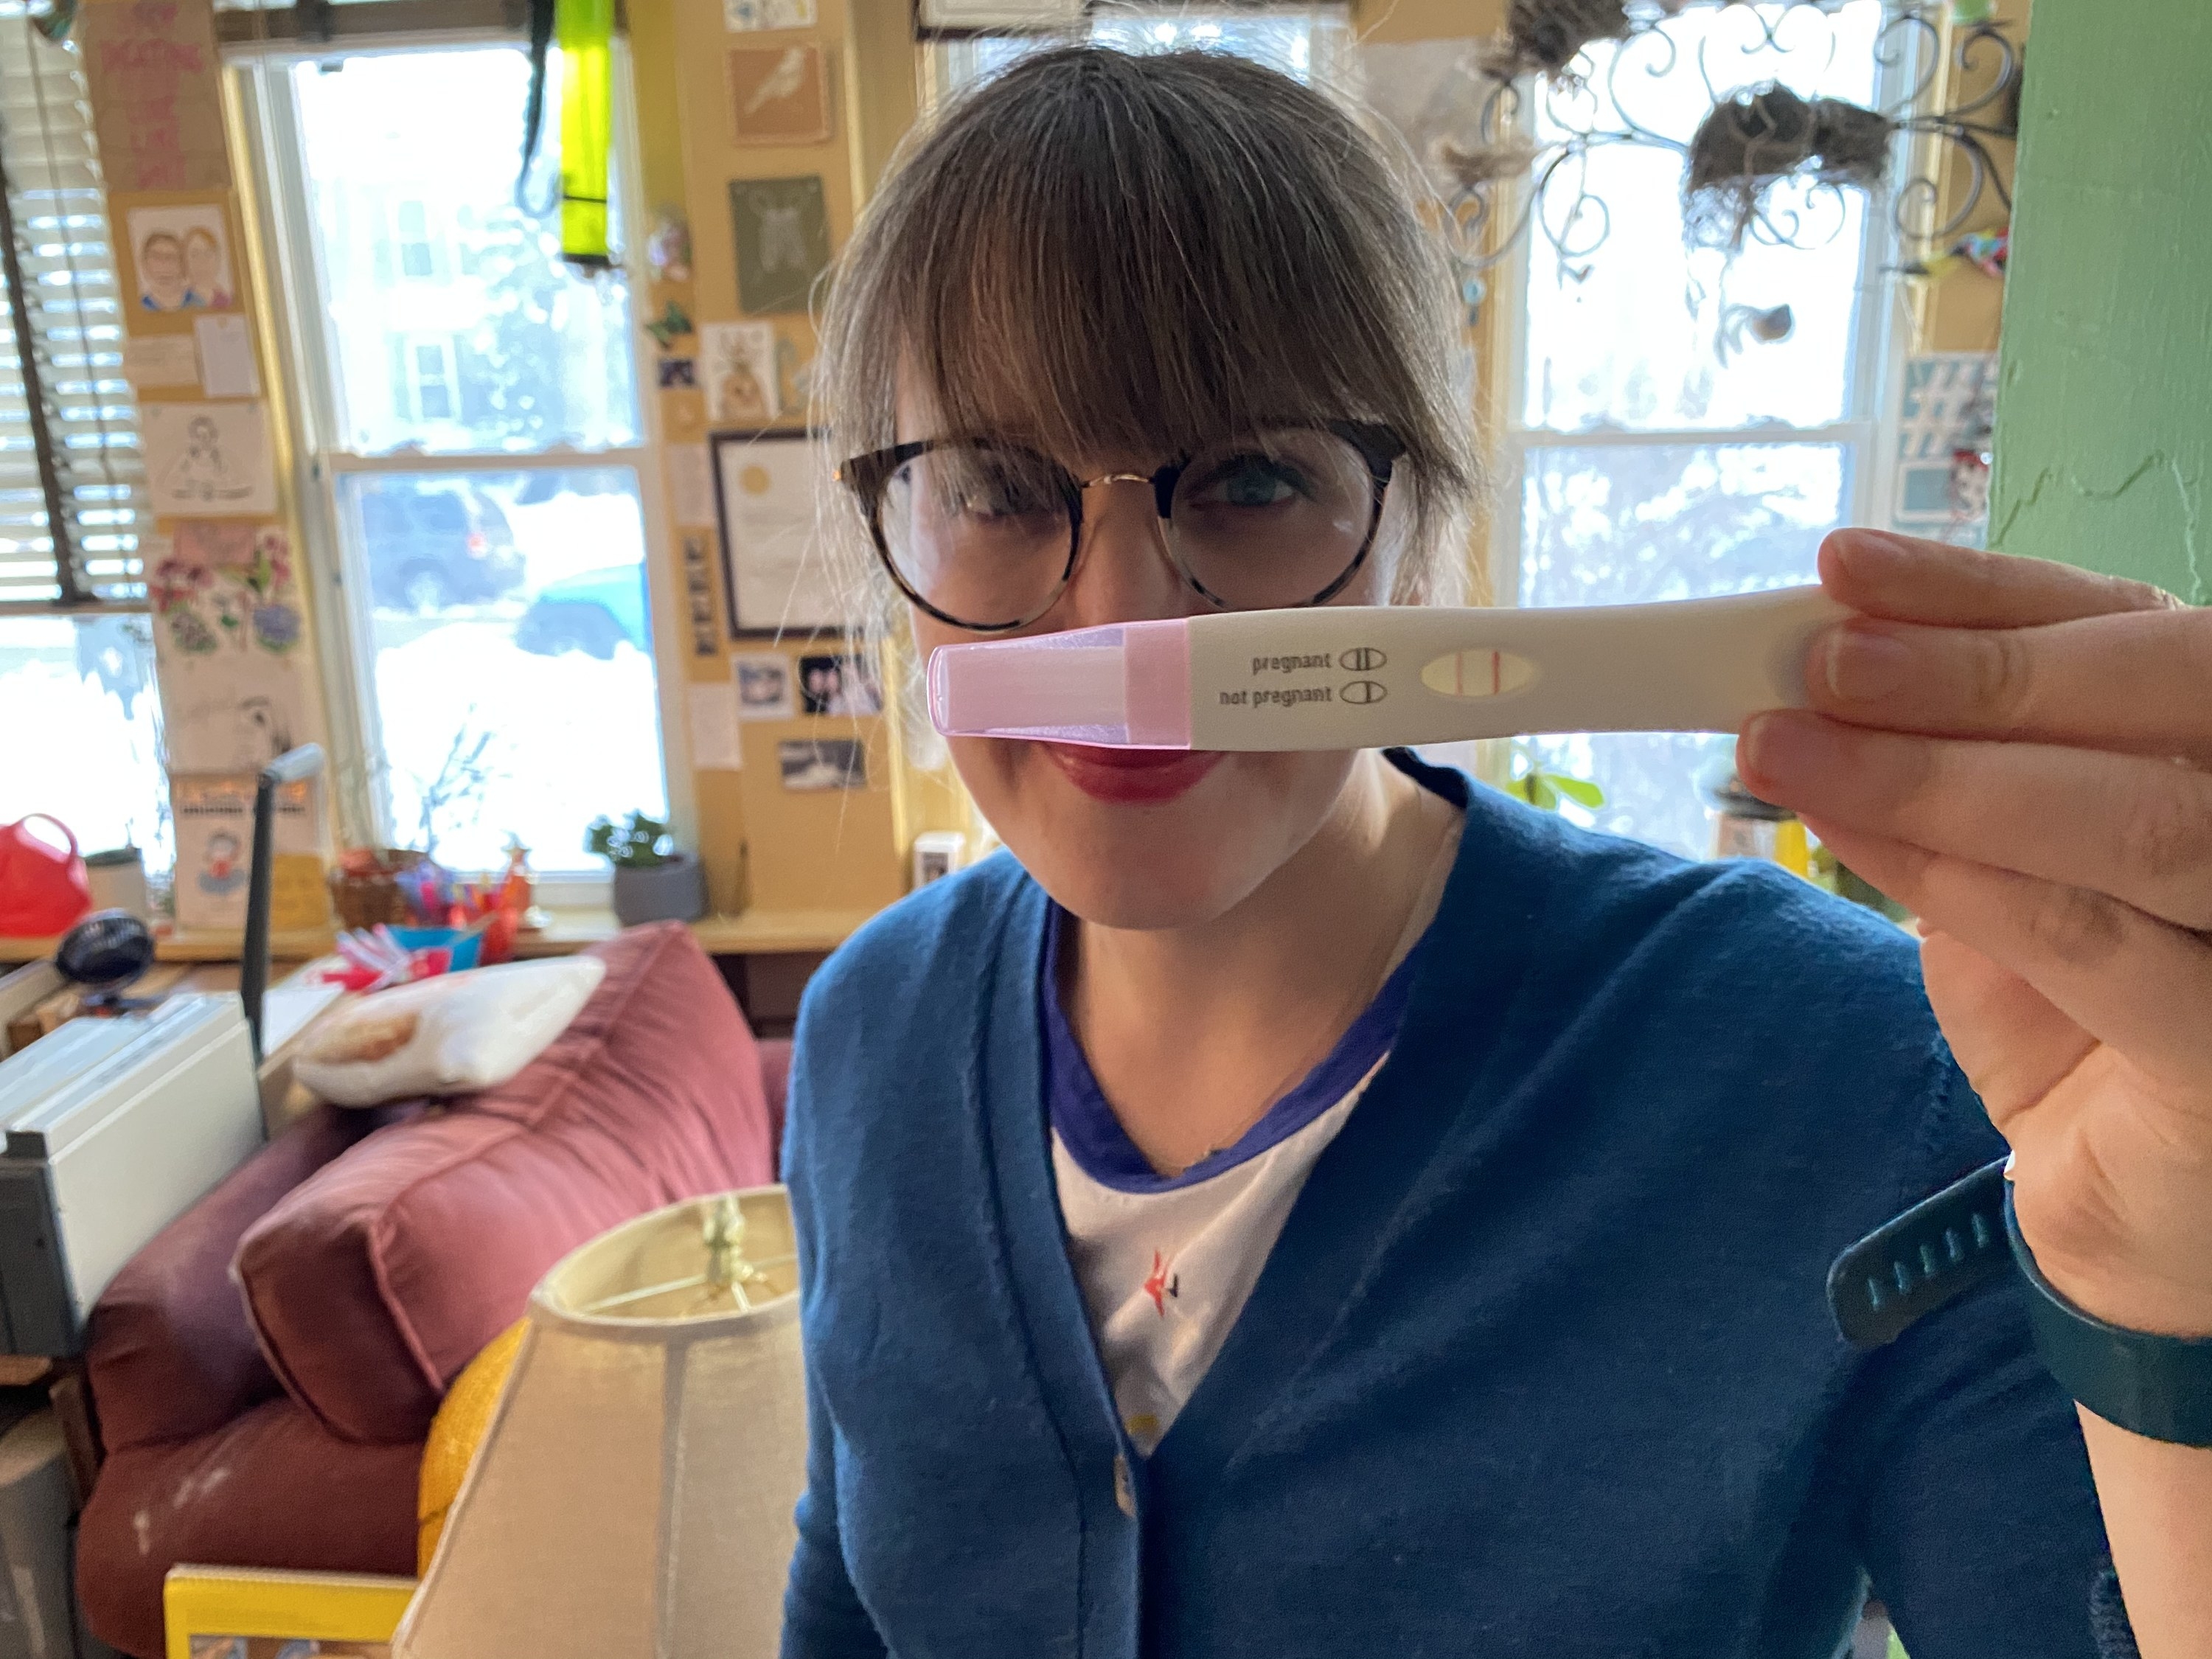 Story author, Sophie, holding up a positive pregnancy test and smiling